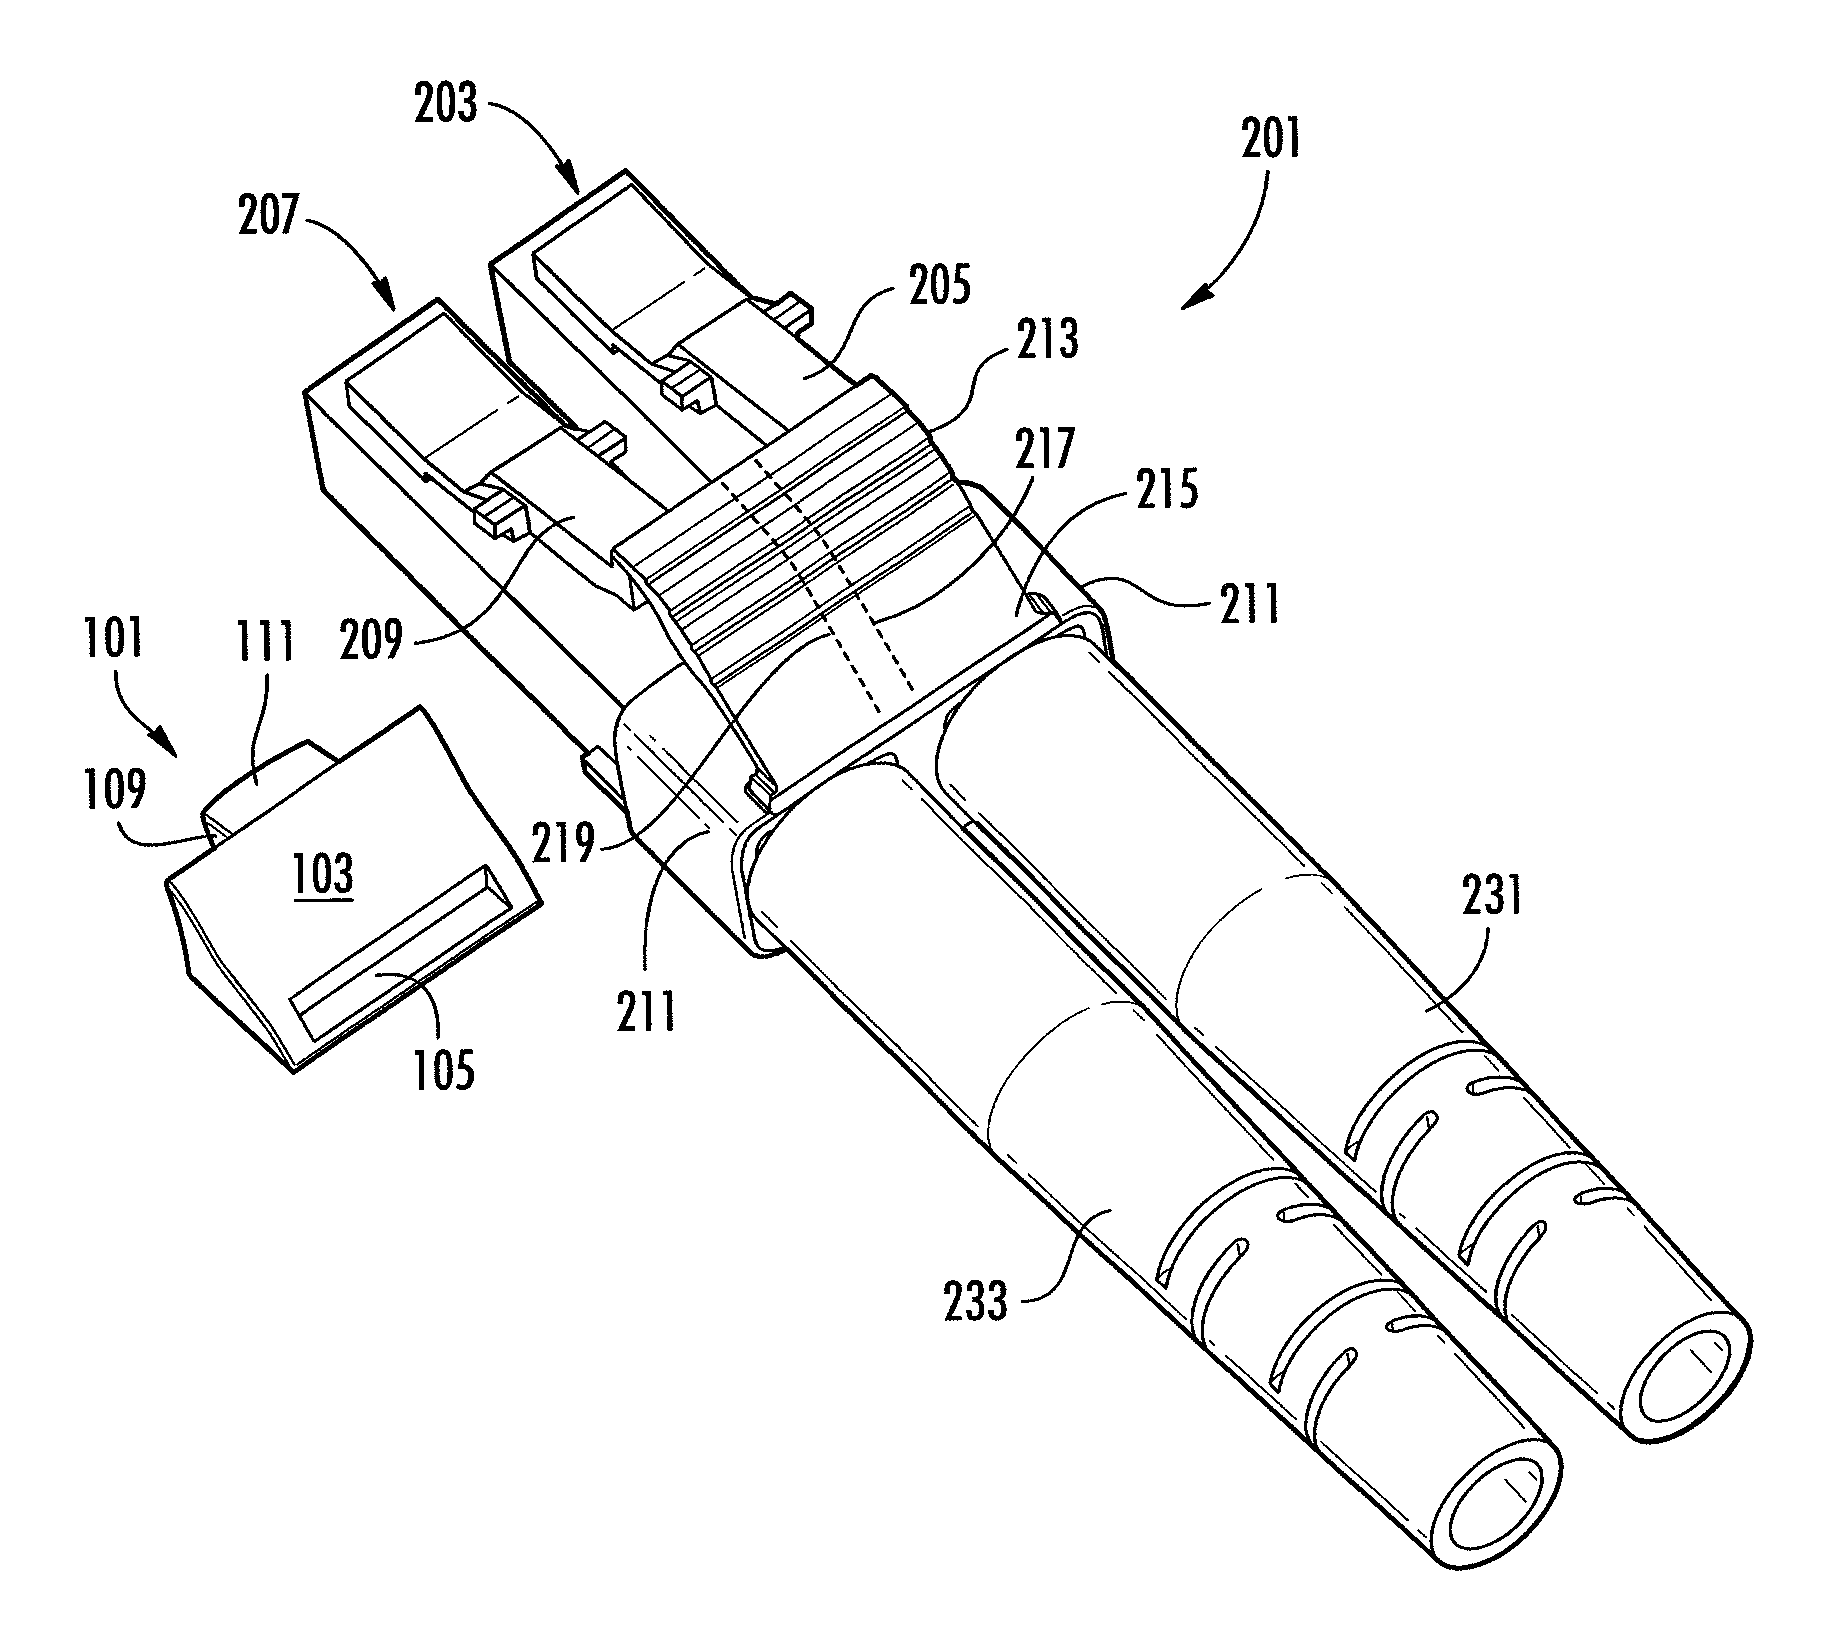 Locking optical and/or electrical connectors and cable assemblies